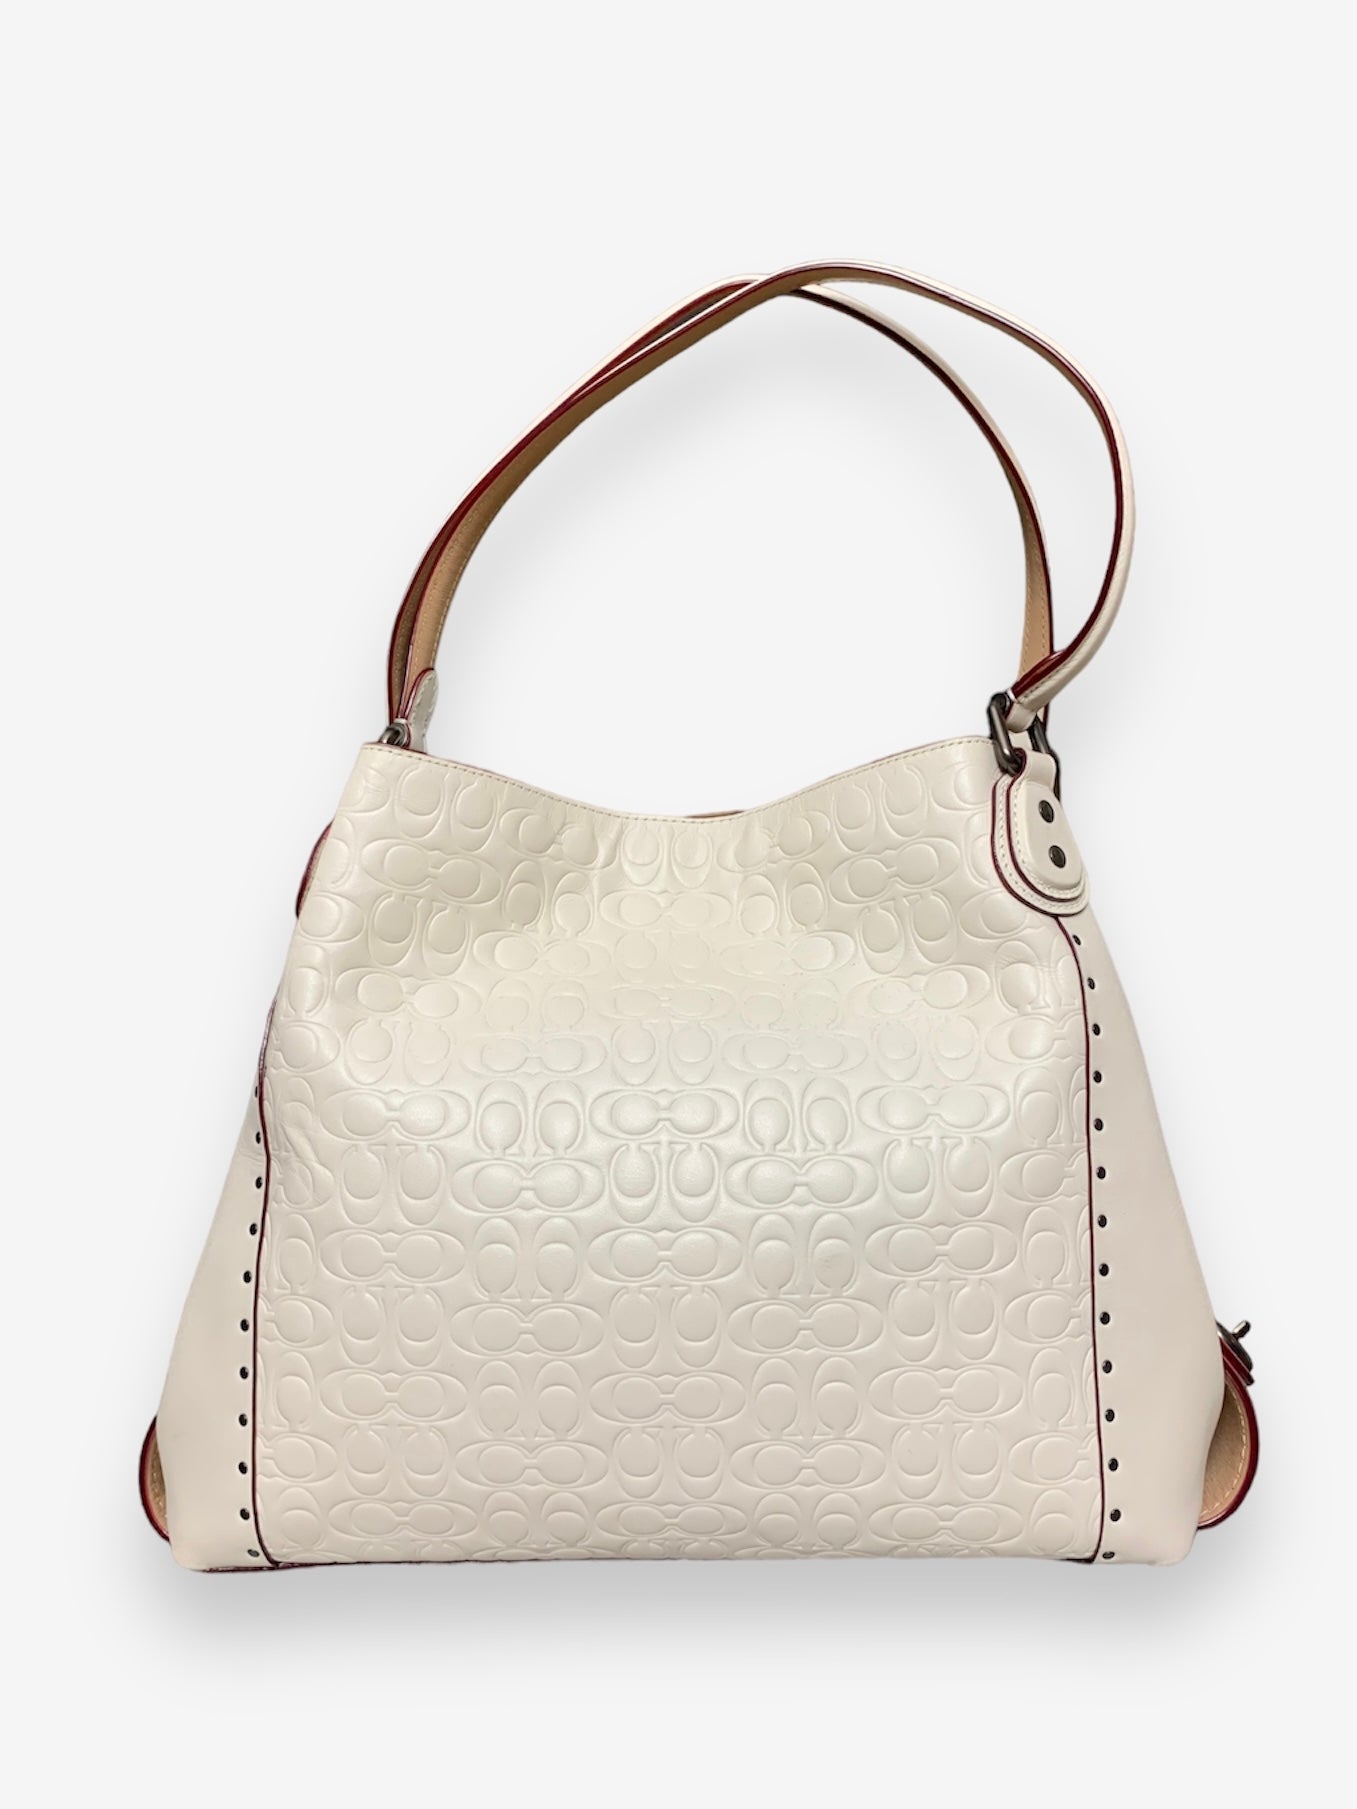 Coach embossed leather bag